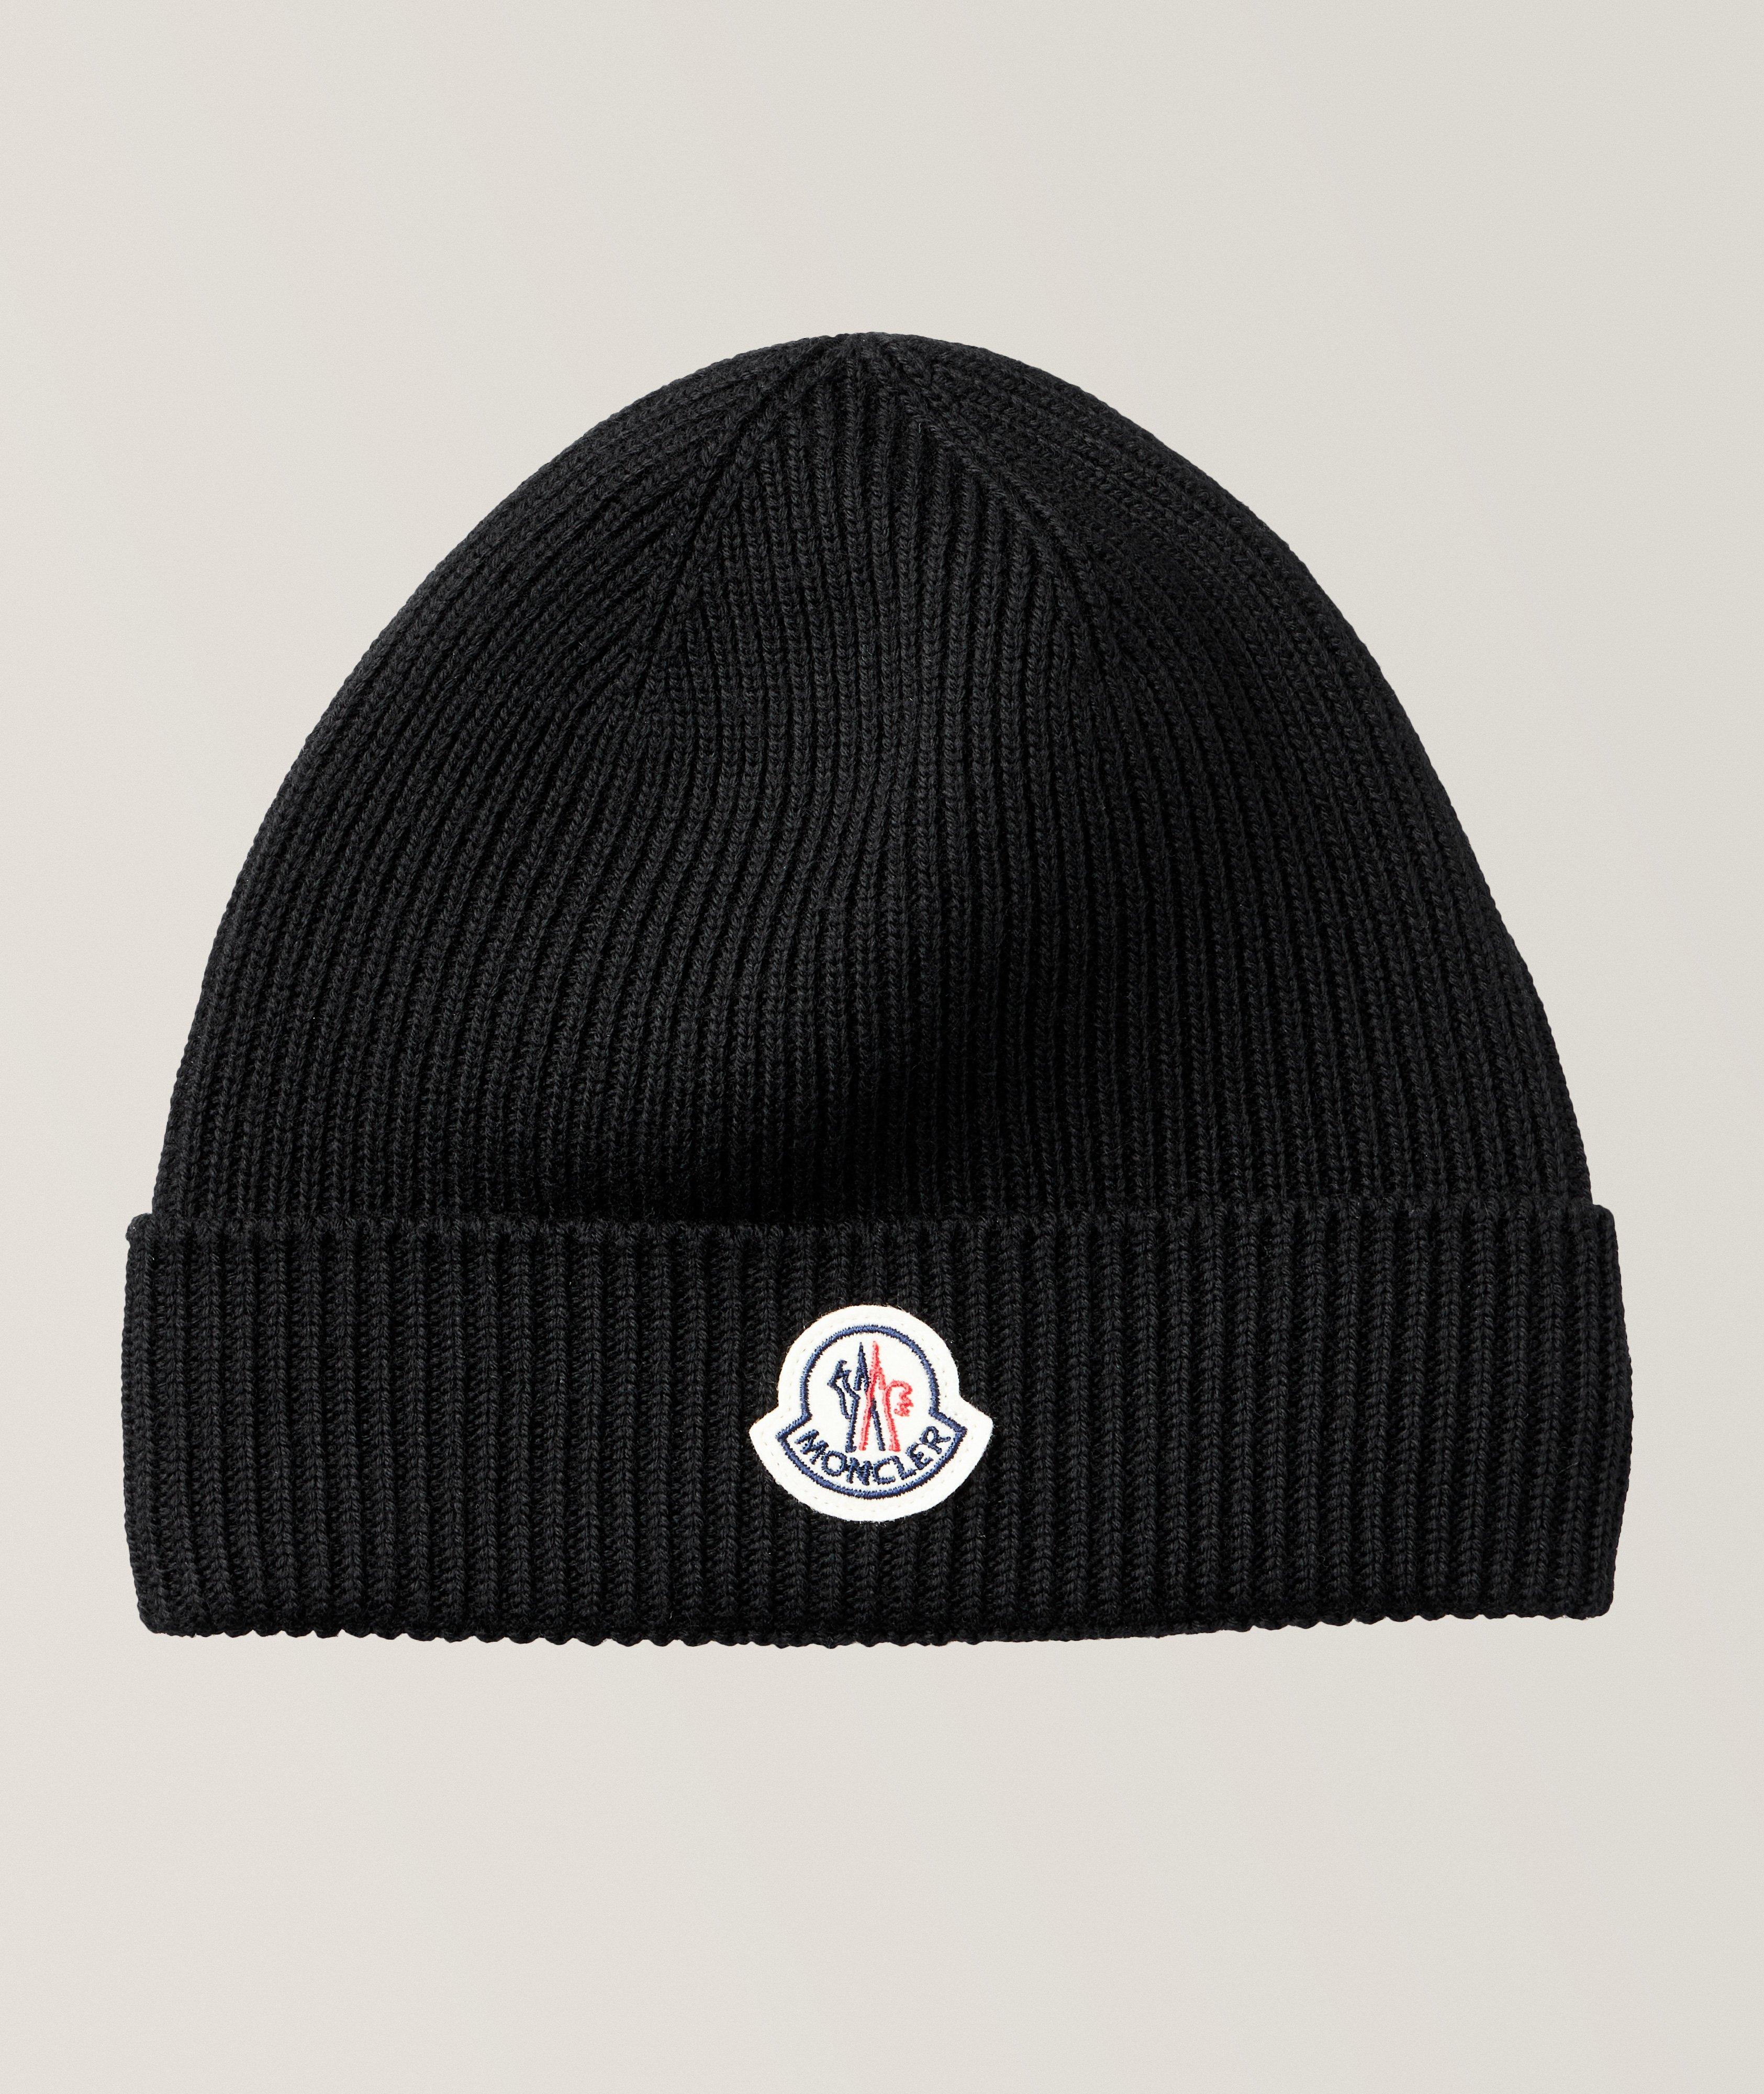 Moncler Berretto Tricot Patch Logo Virgin Wool Toque | Hats